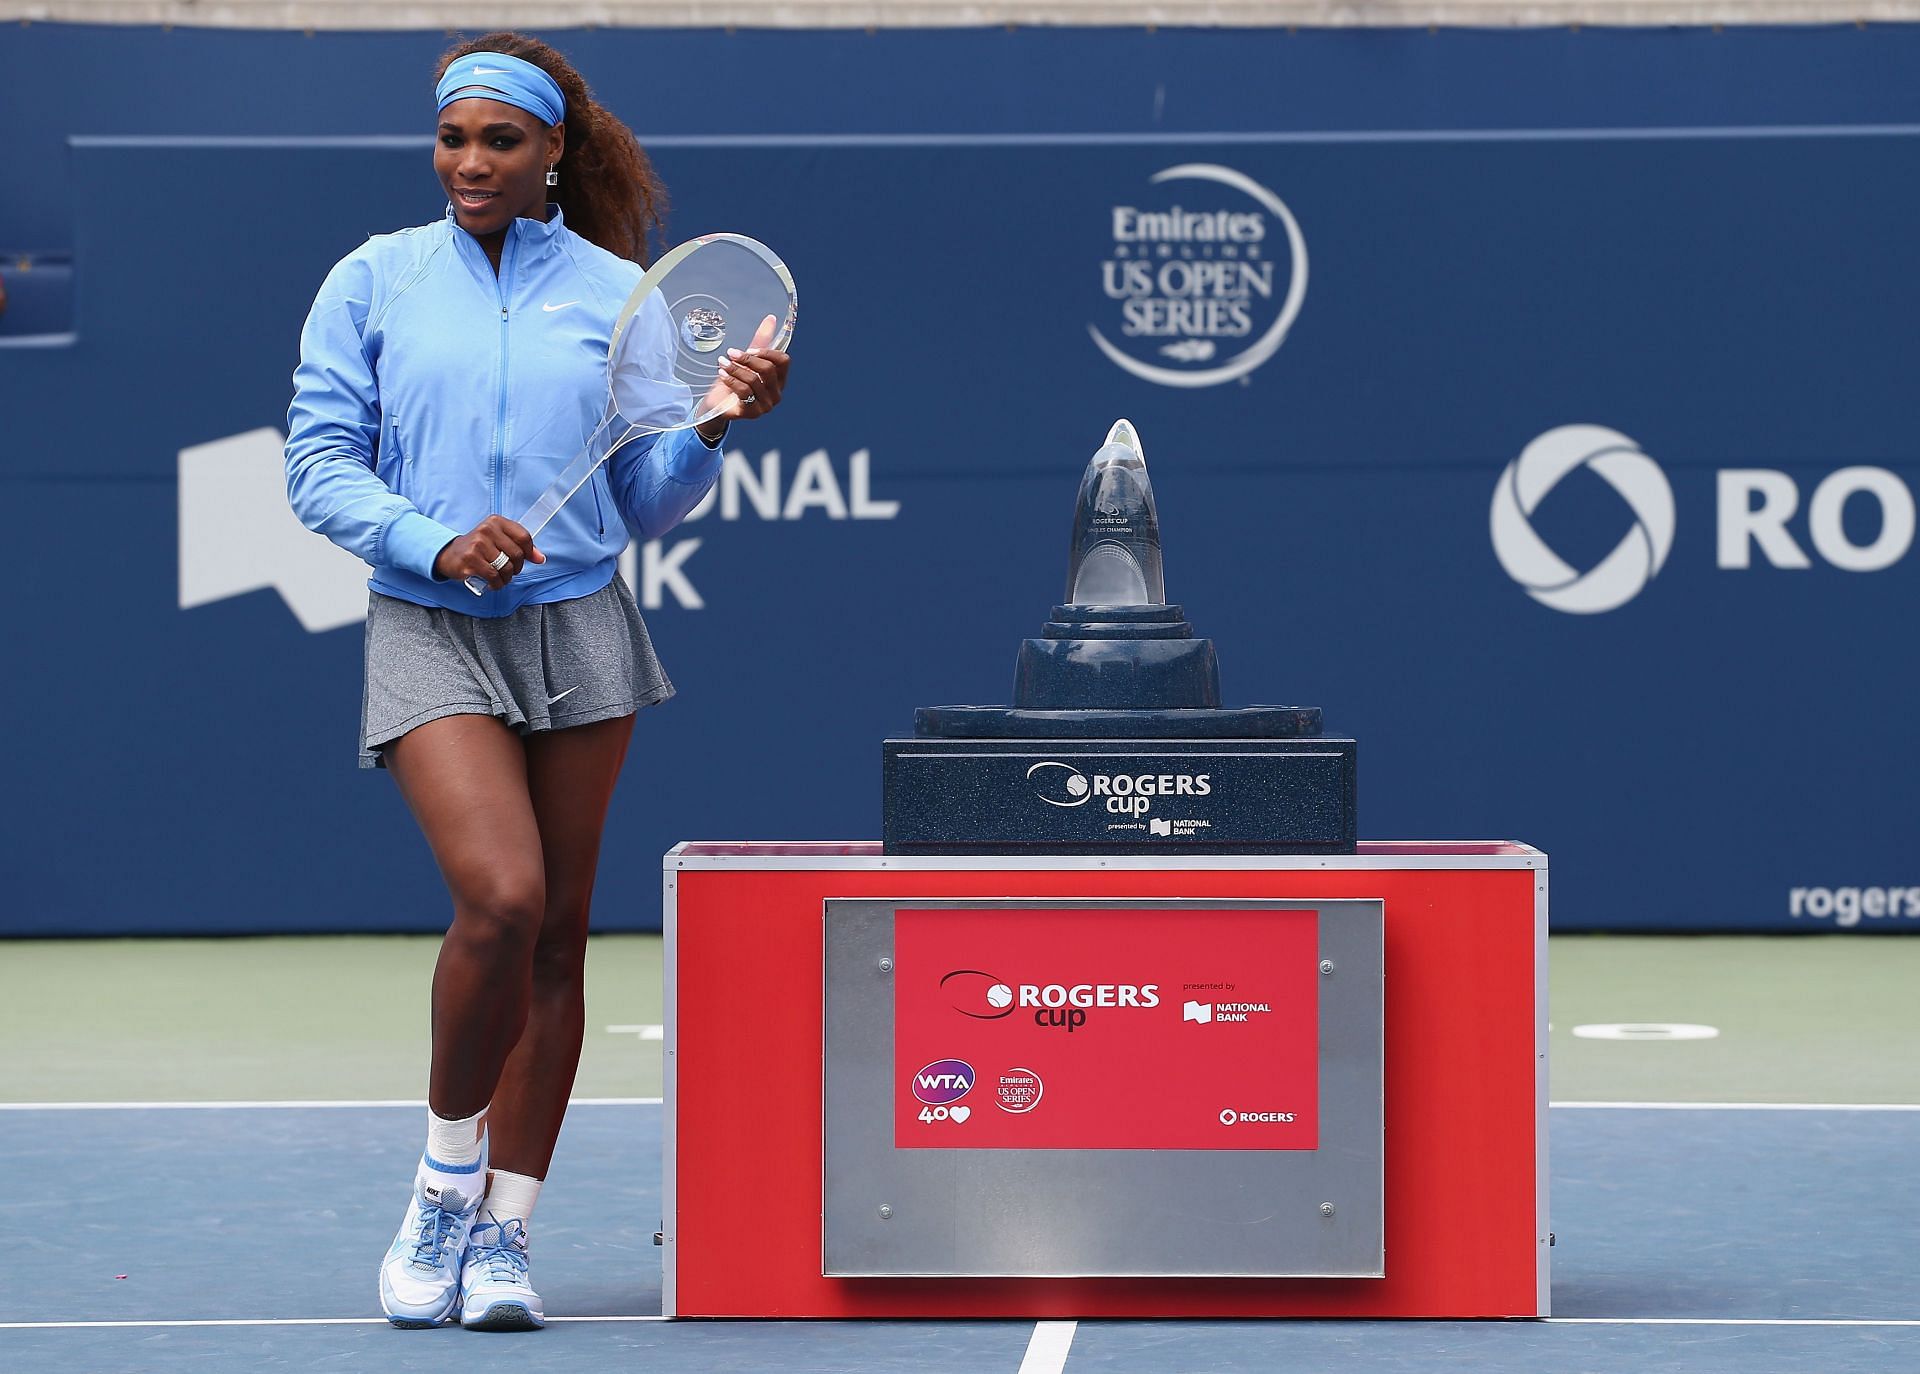 Serena Williams pictured at the 2013 Rogers Cup.